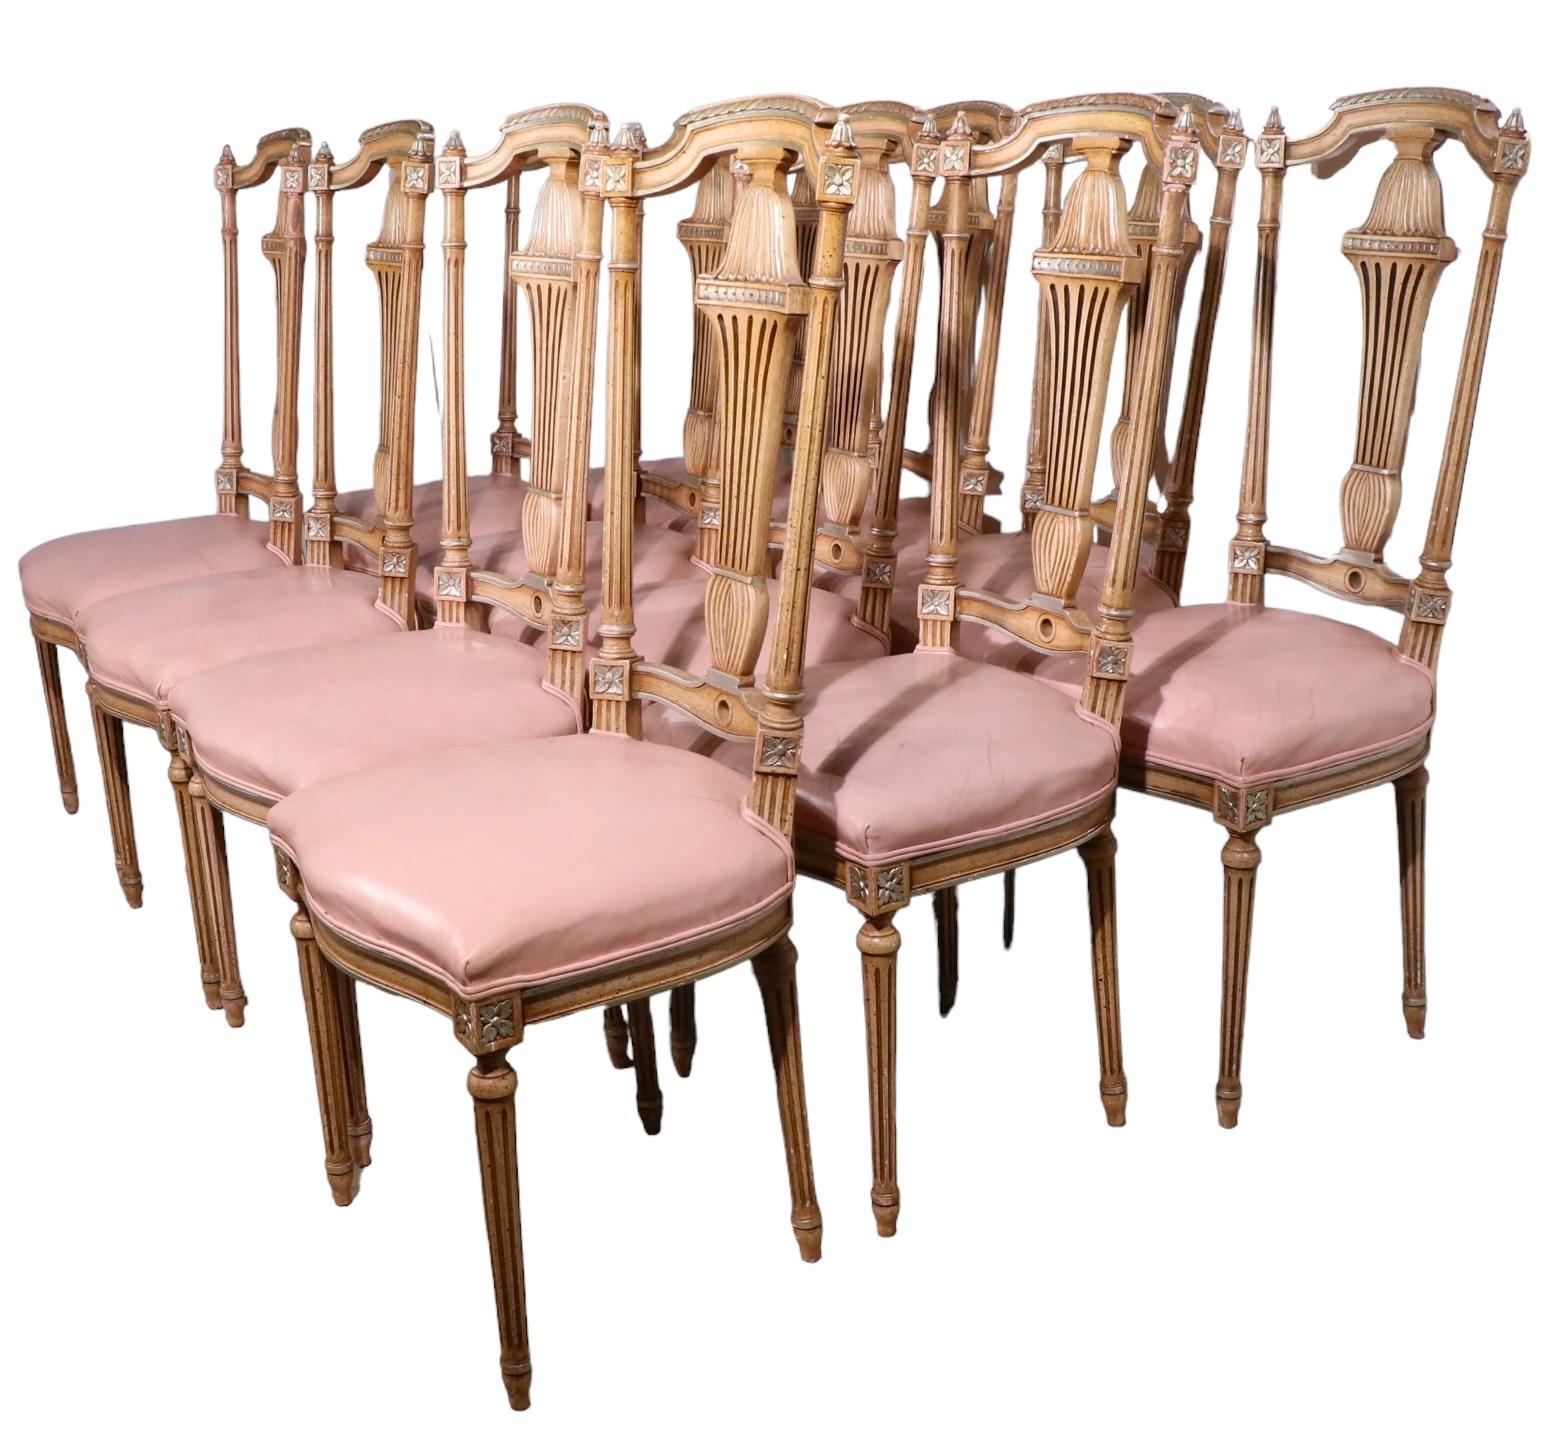 Decorative Set of 12 Italian Style Dining Chairs of Carved Wood and Leather For Sale 4